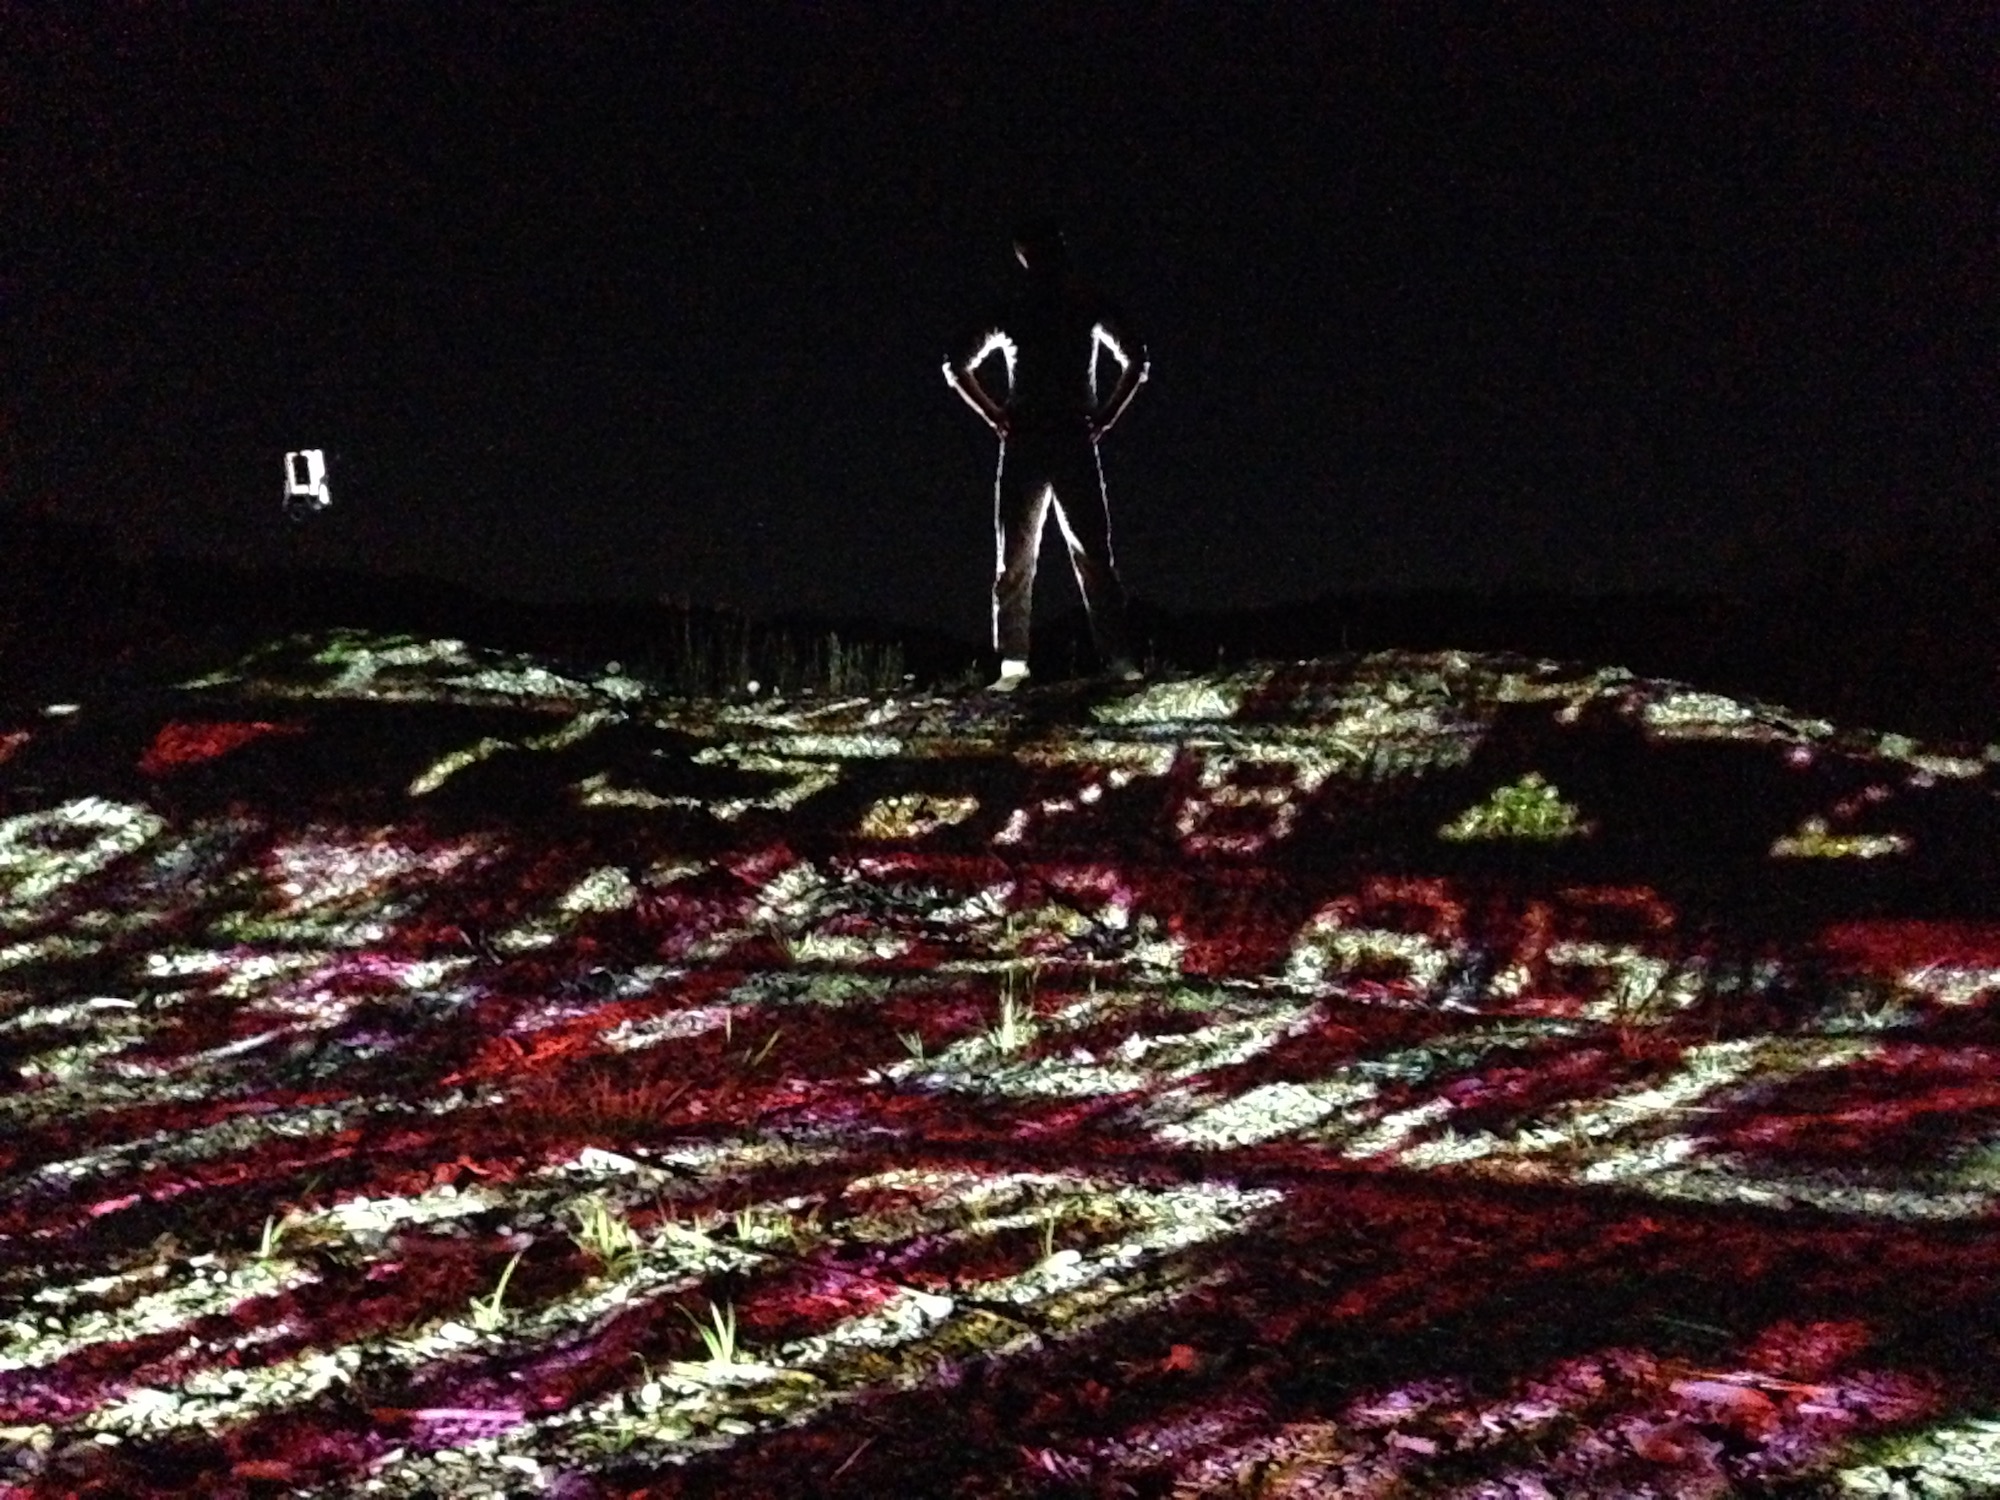 Blake, a dancer, on a hill projected with stylized nasdaq tickers and backlit in the dark